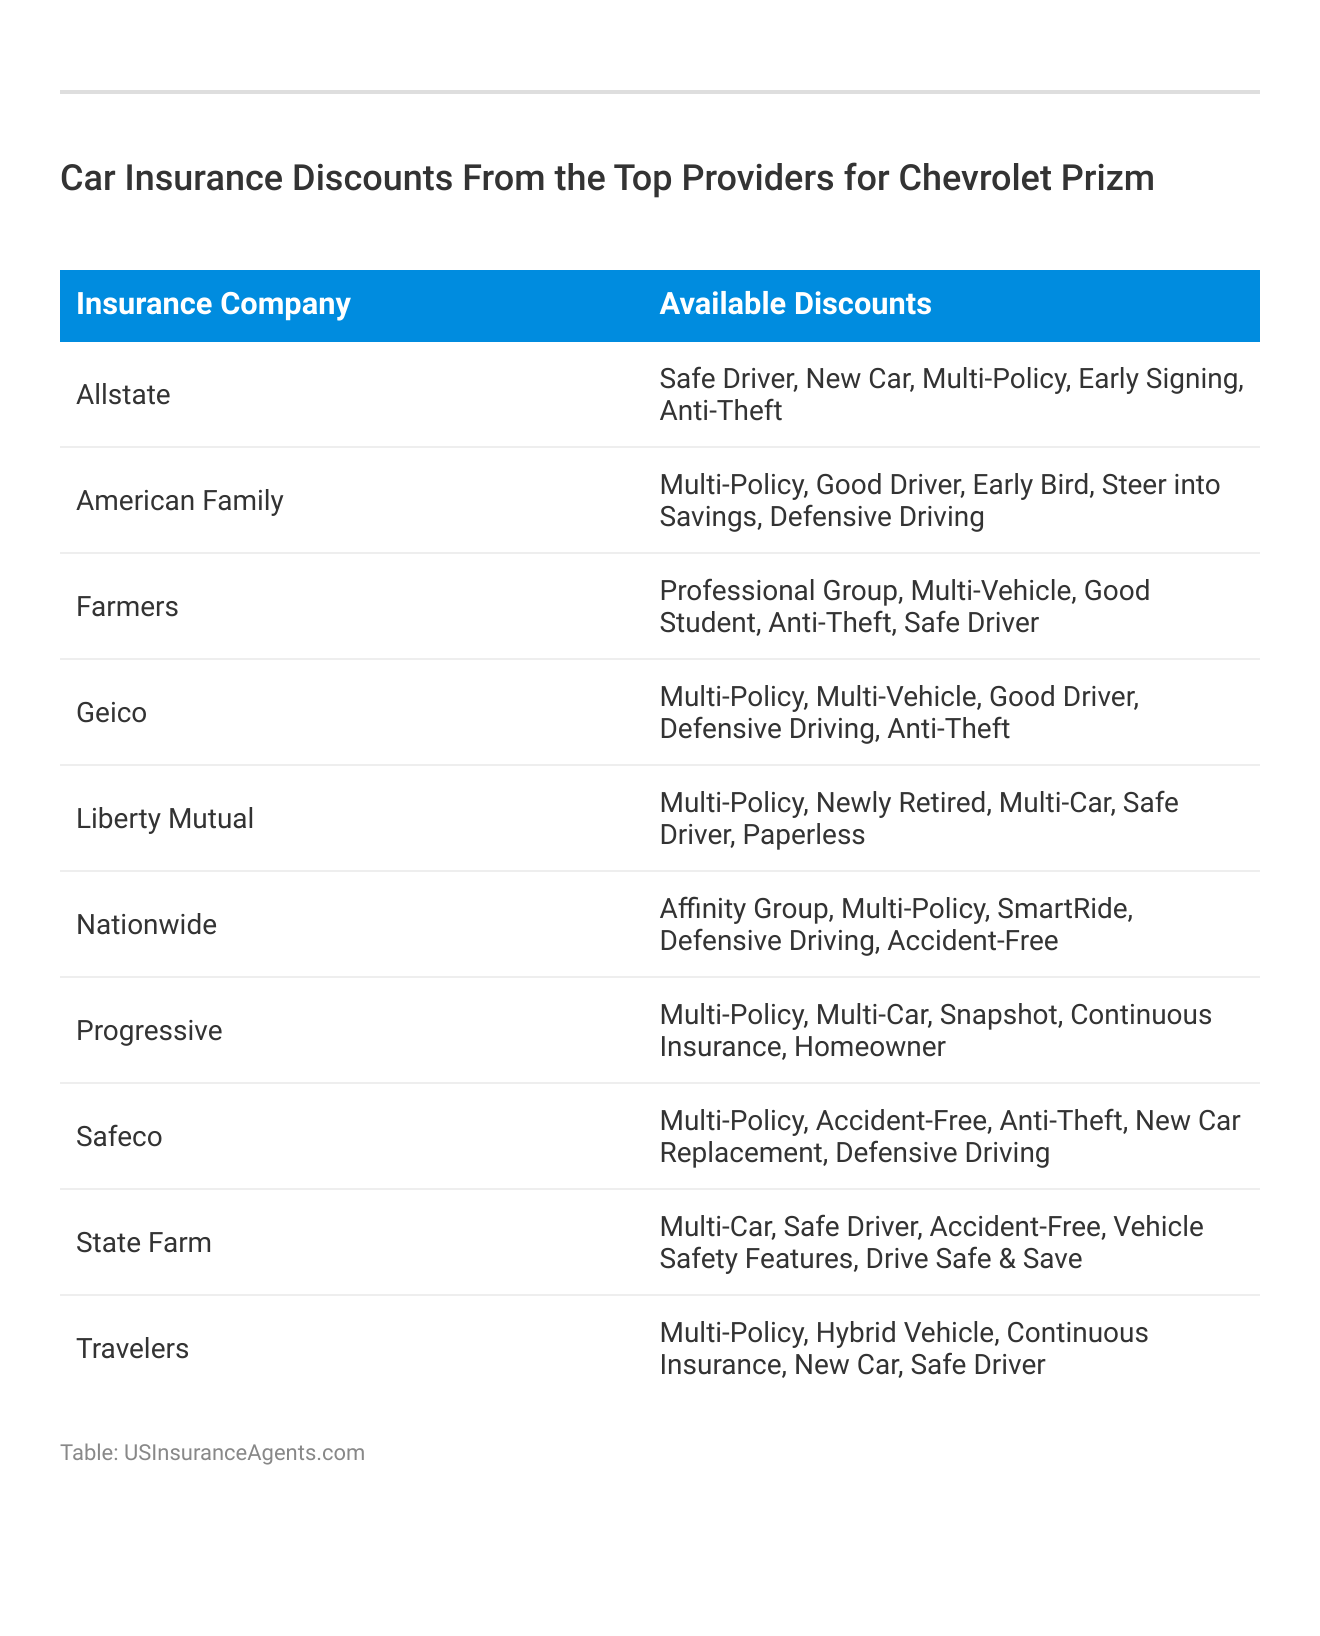 <h3>Car Insurance Discounts From the Top Providers for Chevrolet Prizm</h3>